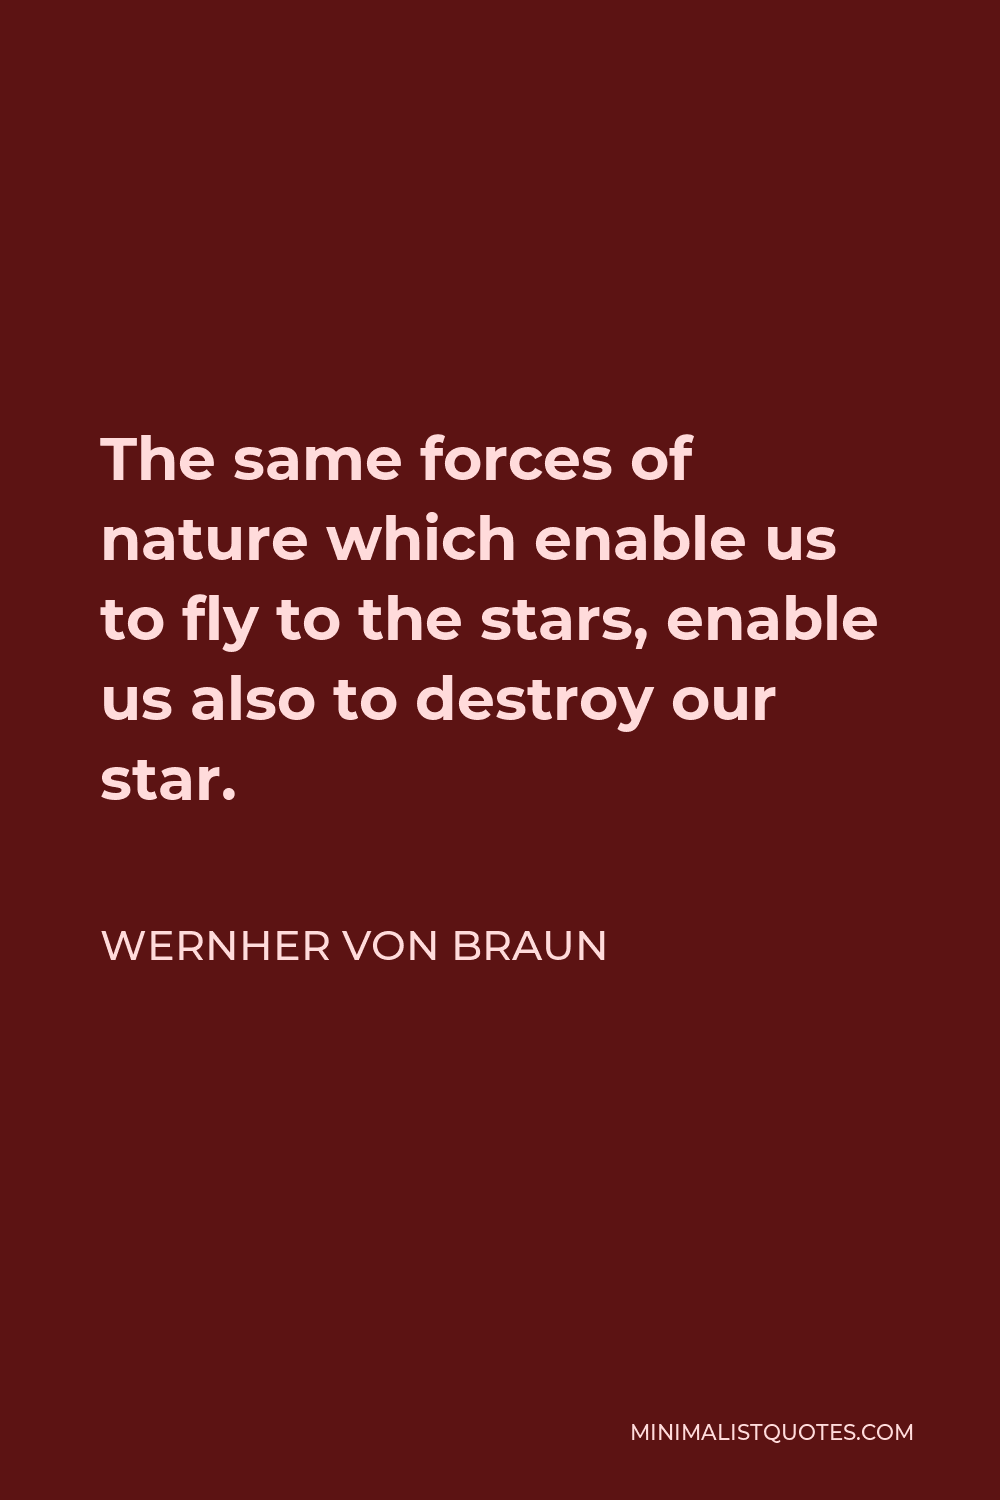 Wernher von Braun Quote - The same forces of nature which enable us to fly to the stars, enable us also to destroy our star.